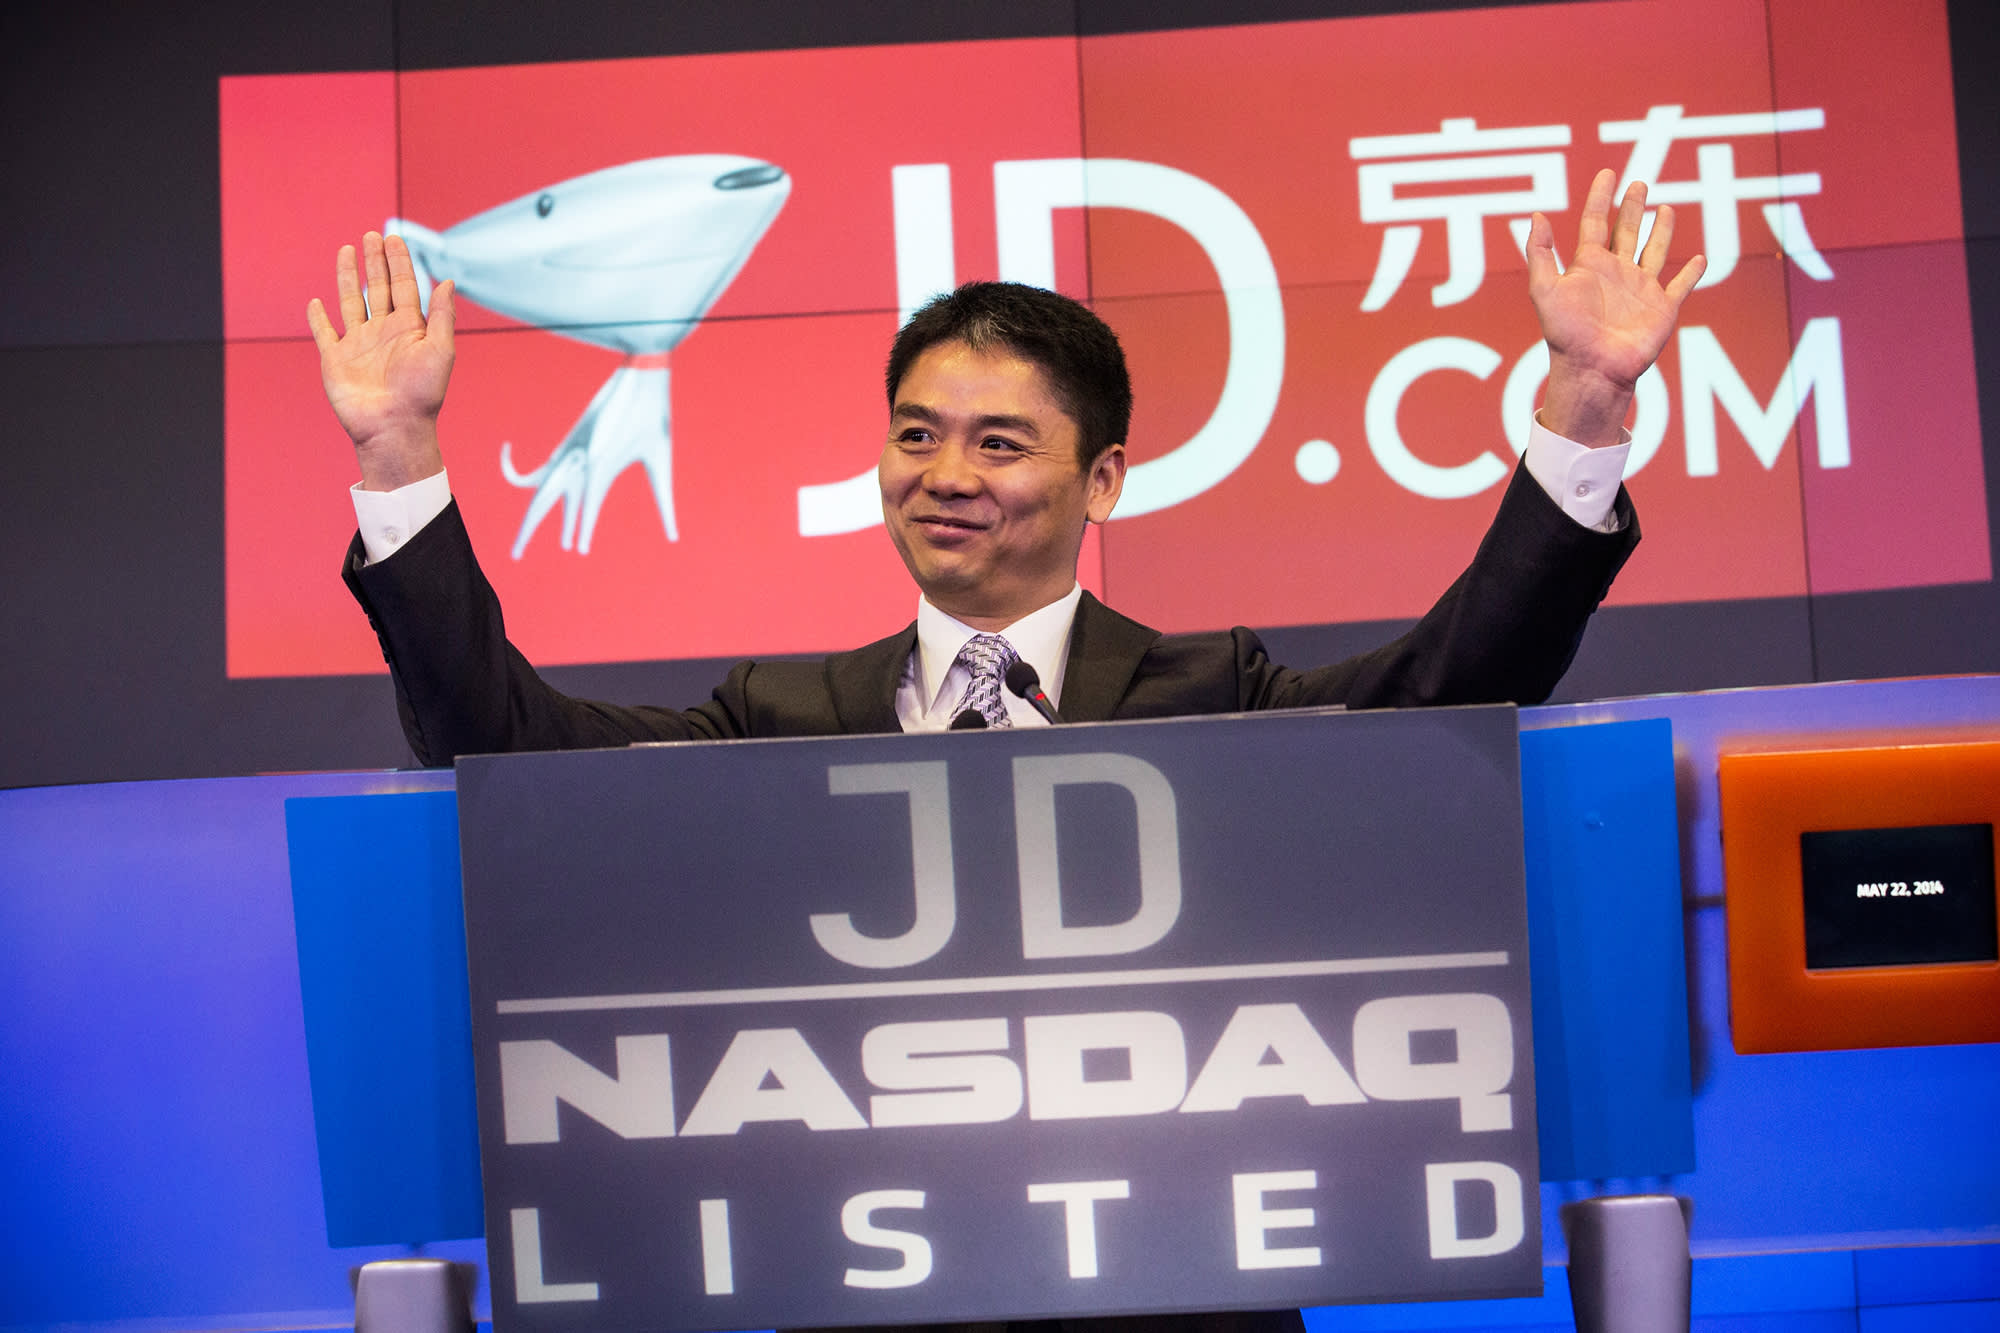 Jd ipo vicap value investing capital resources